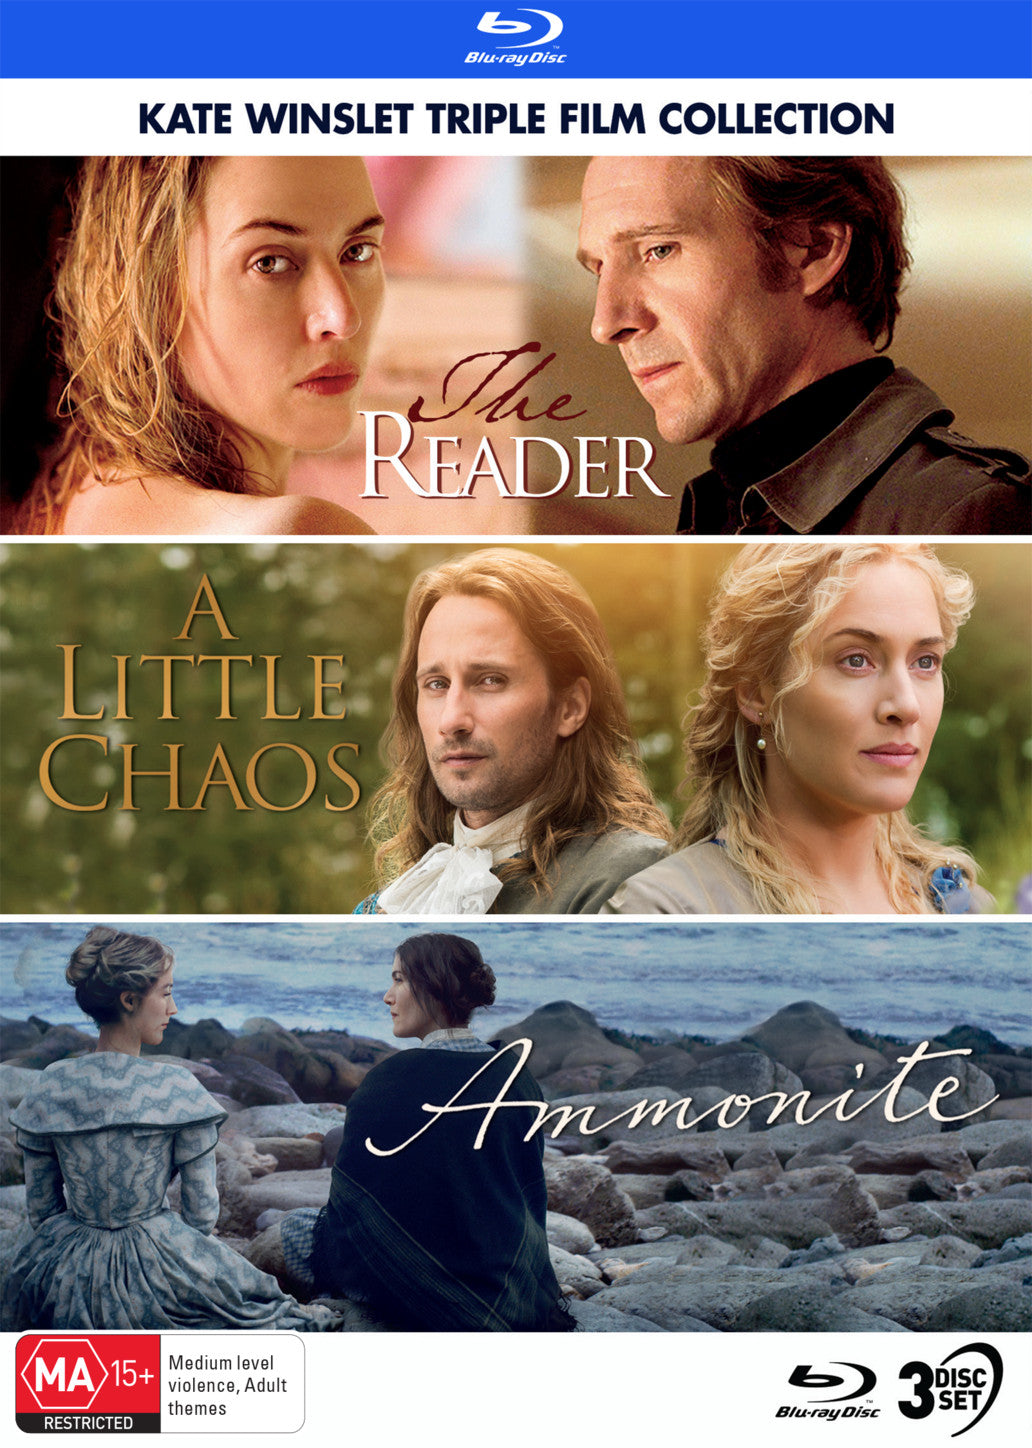 KATE WINSLET: TRIPLE FILM COLLECTION (THE READER / A LITTLE CHAOS / AMMONITE) - SPECIAL EDITION BLU-RAY